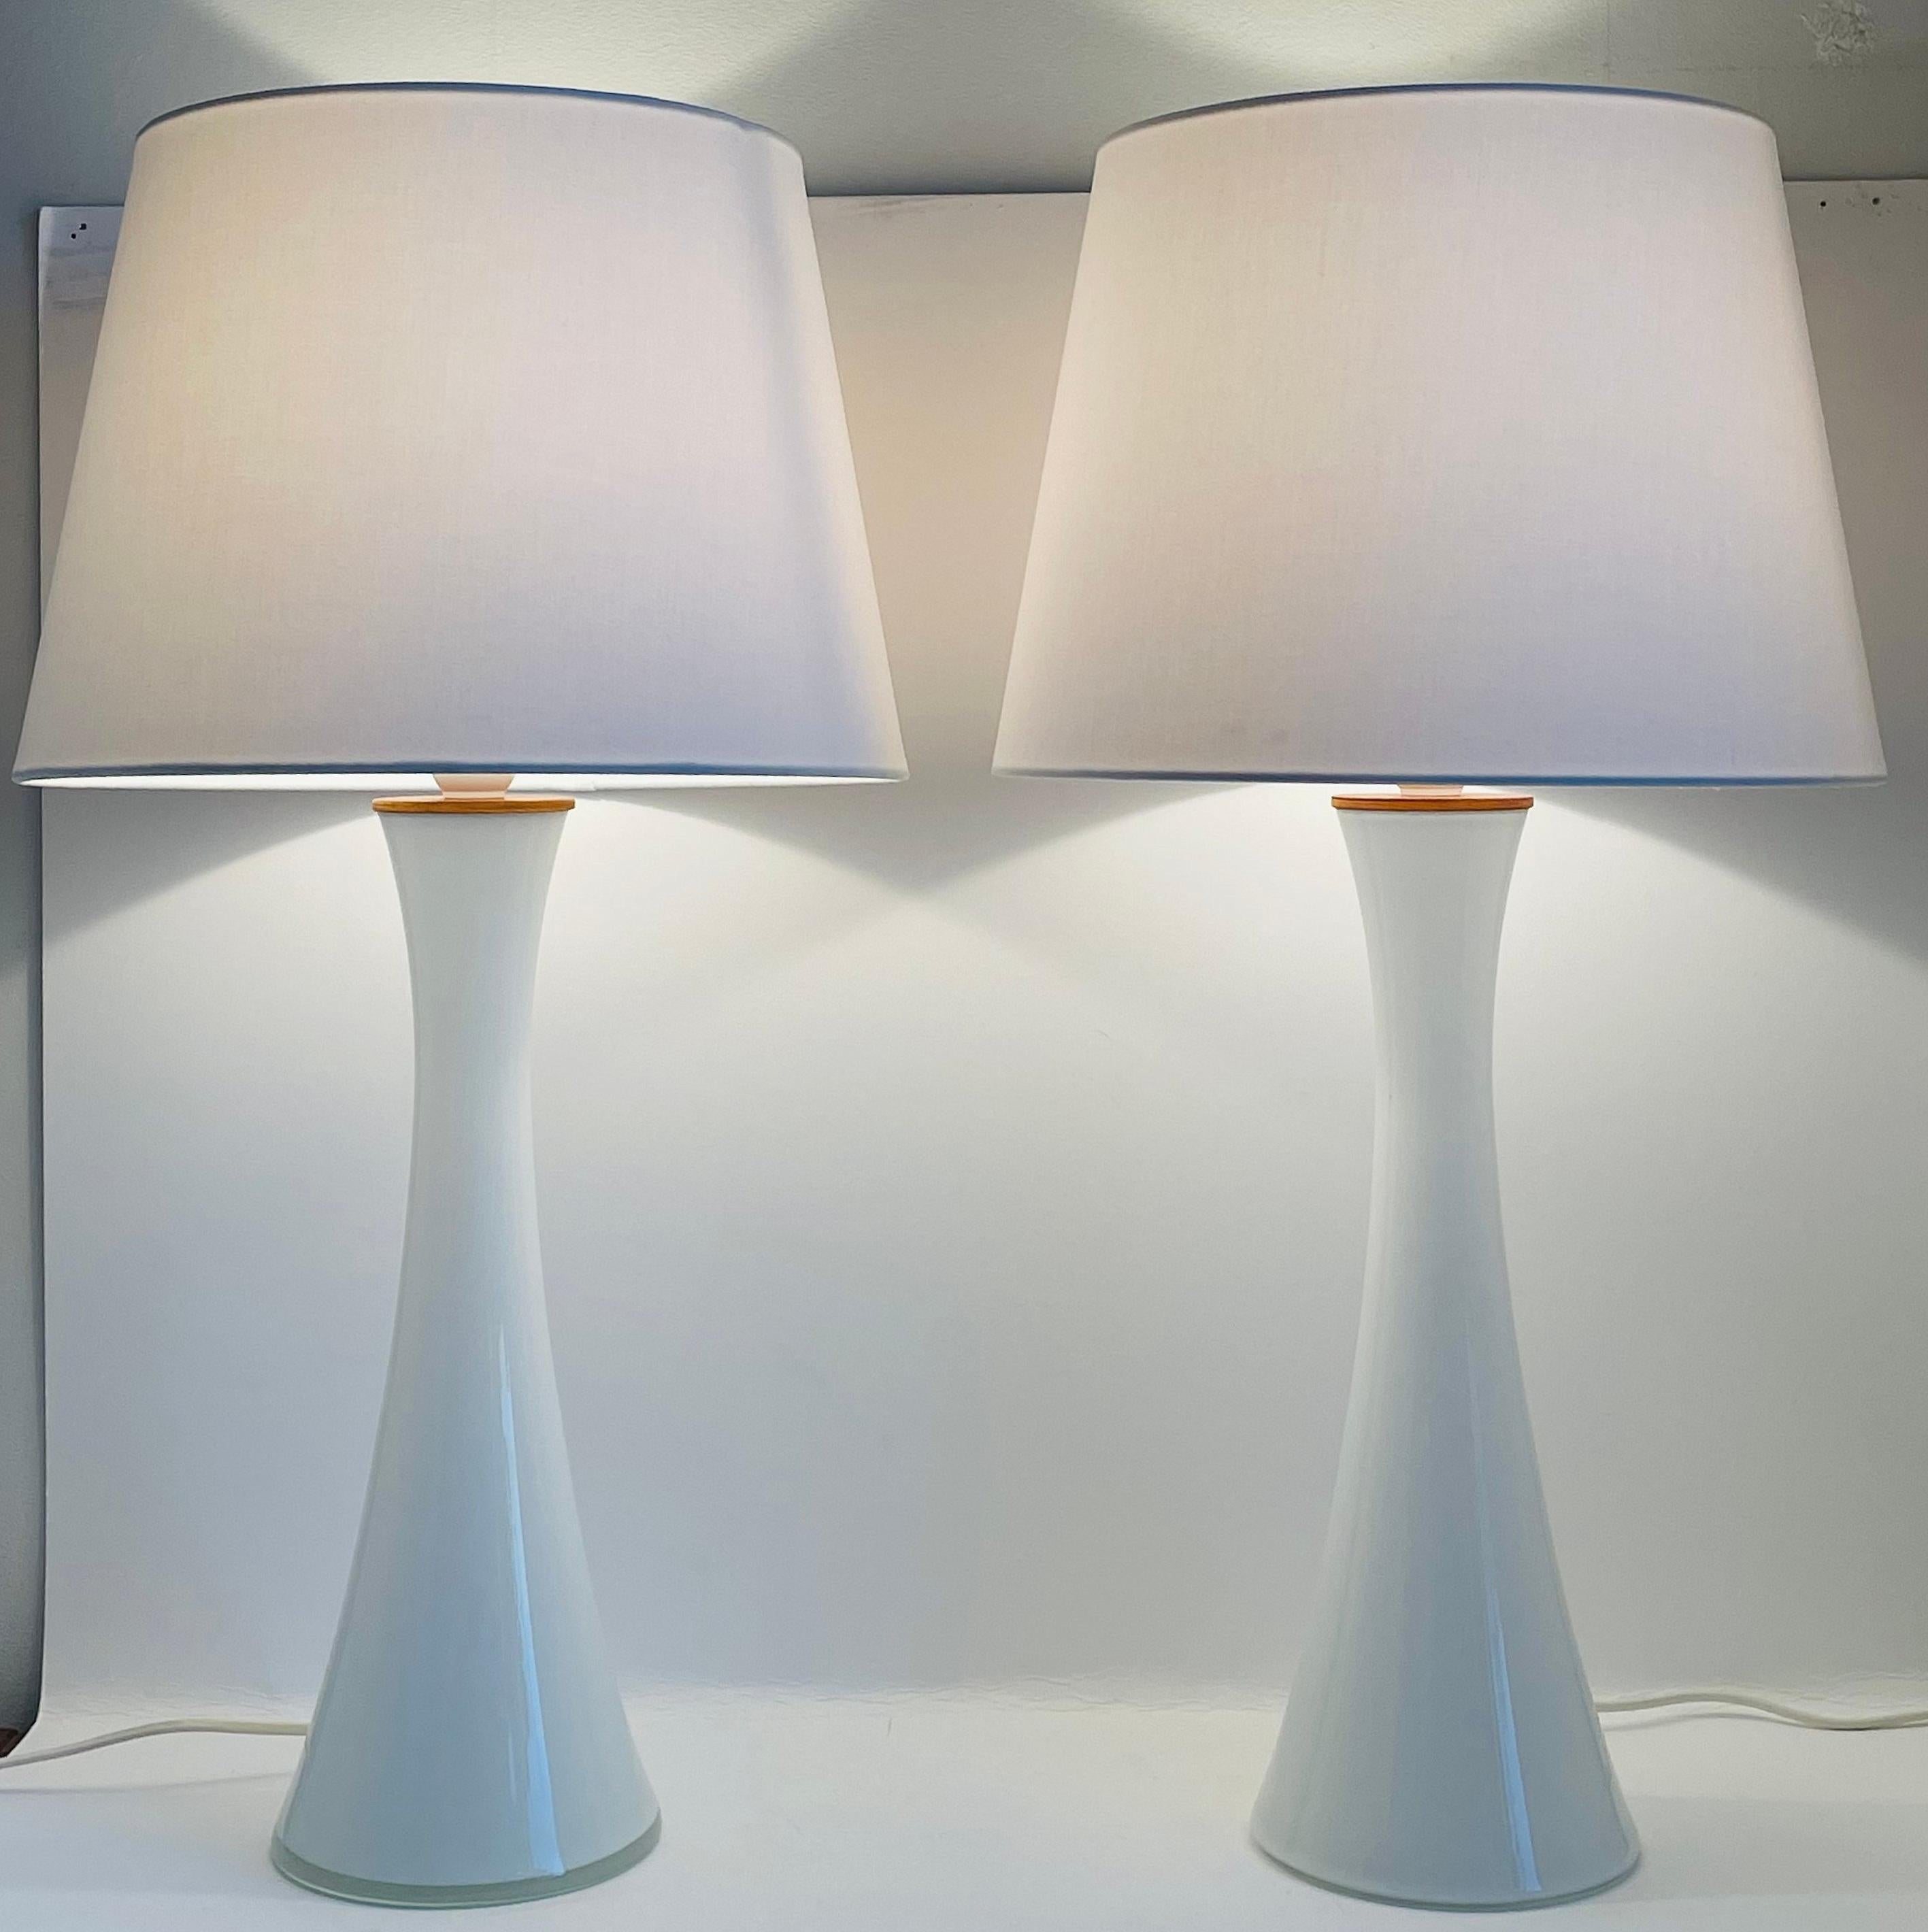 A pair of diabolo shaped Swedish milk white glass table lamps with teak fittings. Designed by Berndt Nordstedt for Bergboms. Please note: We are selling these lamps without the lamp shades. The measurements stated are of the lamps without the